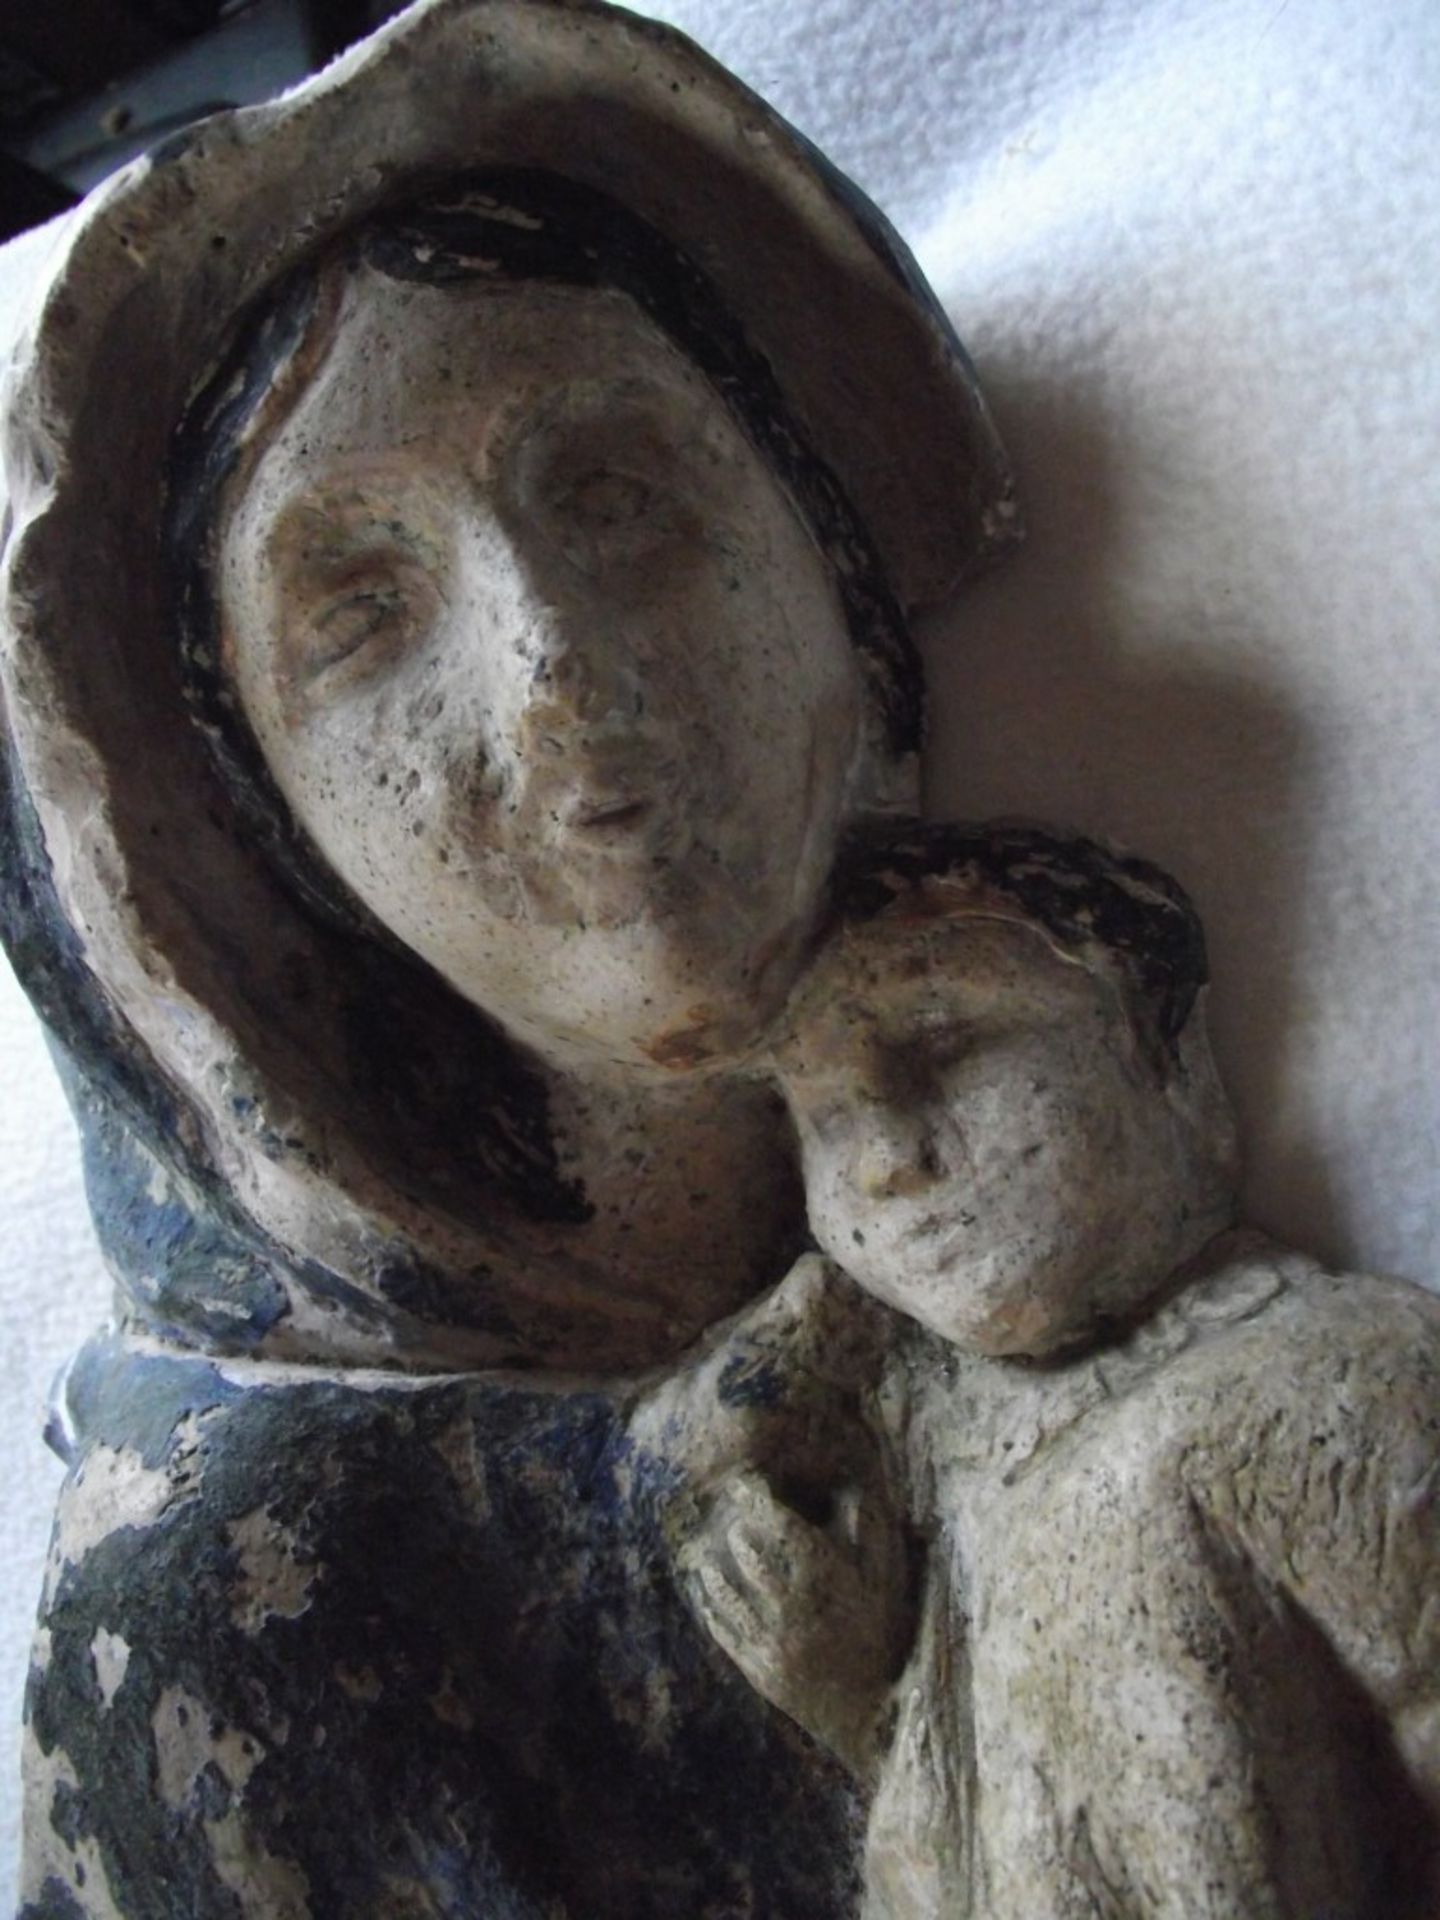 Antique Madonna & Child Wall Hanging Figure - 11 3/4"" High. - Image 18 of 21